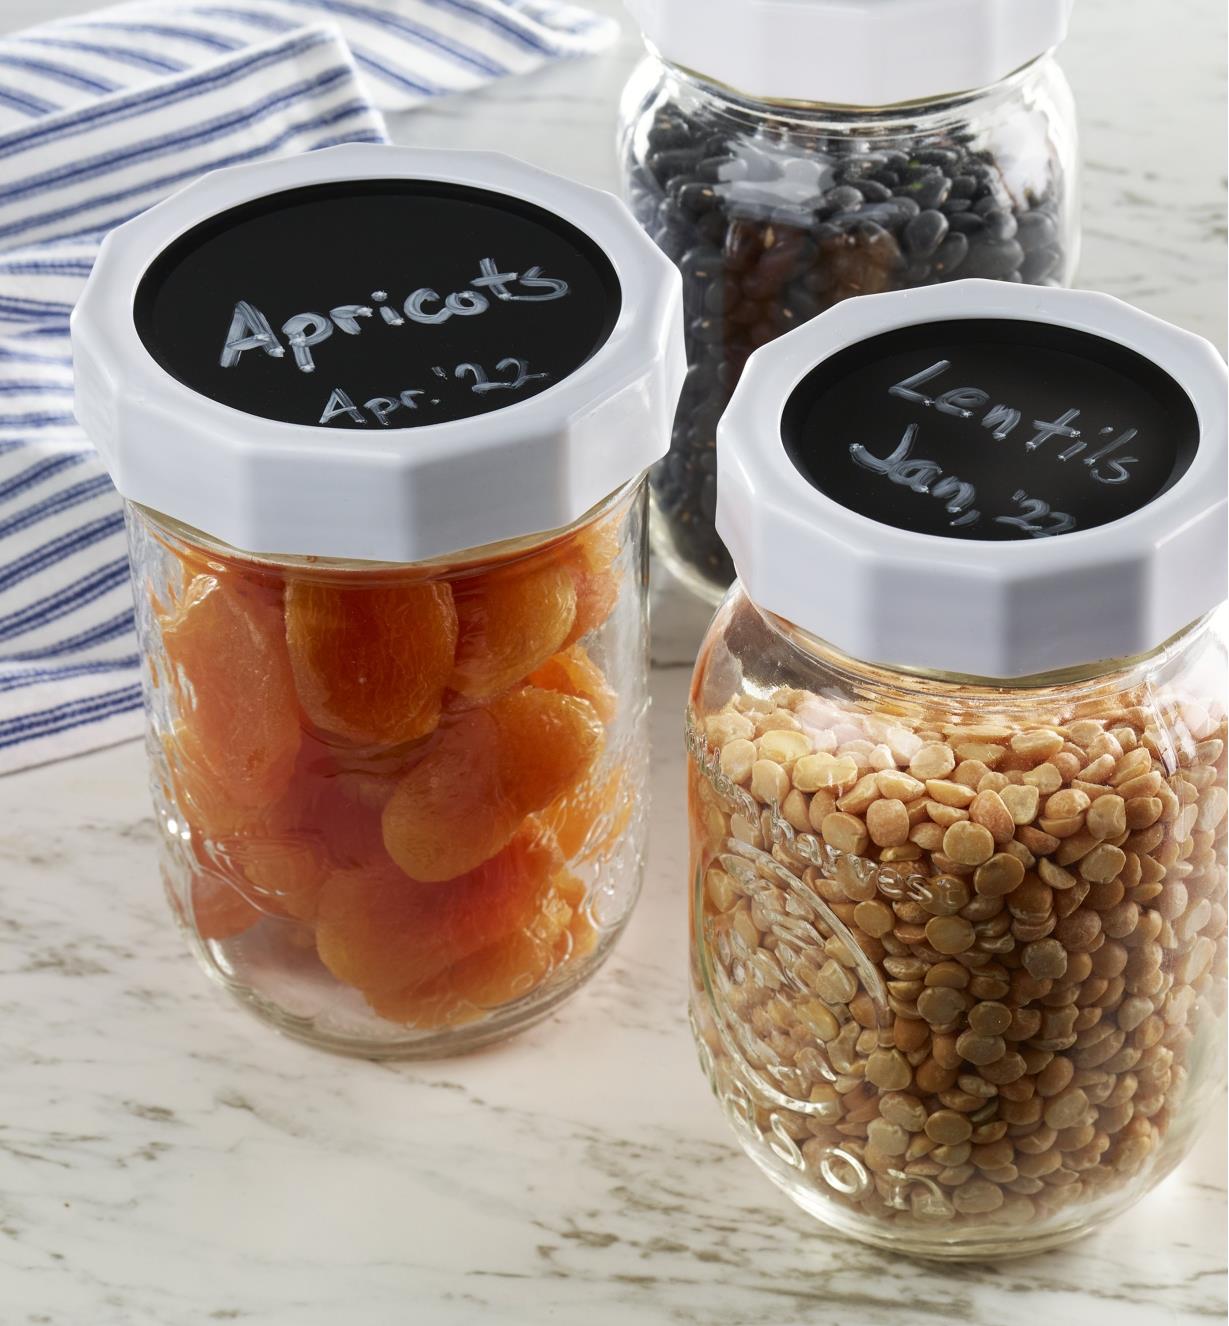 Repurposed canning jars filled with food items have labelled chalk top lids to identify contents